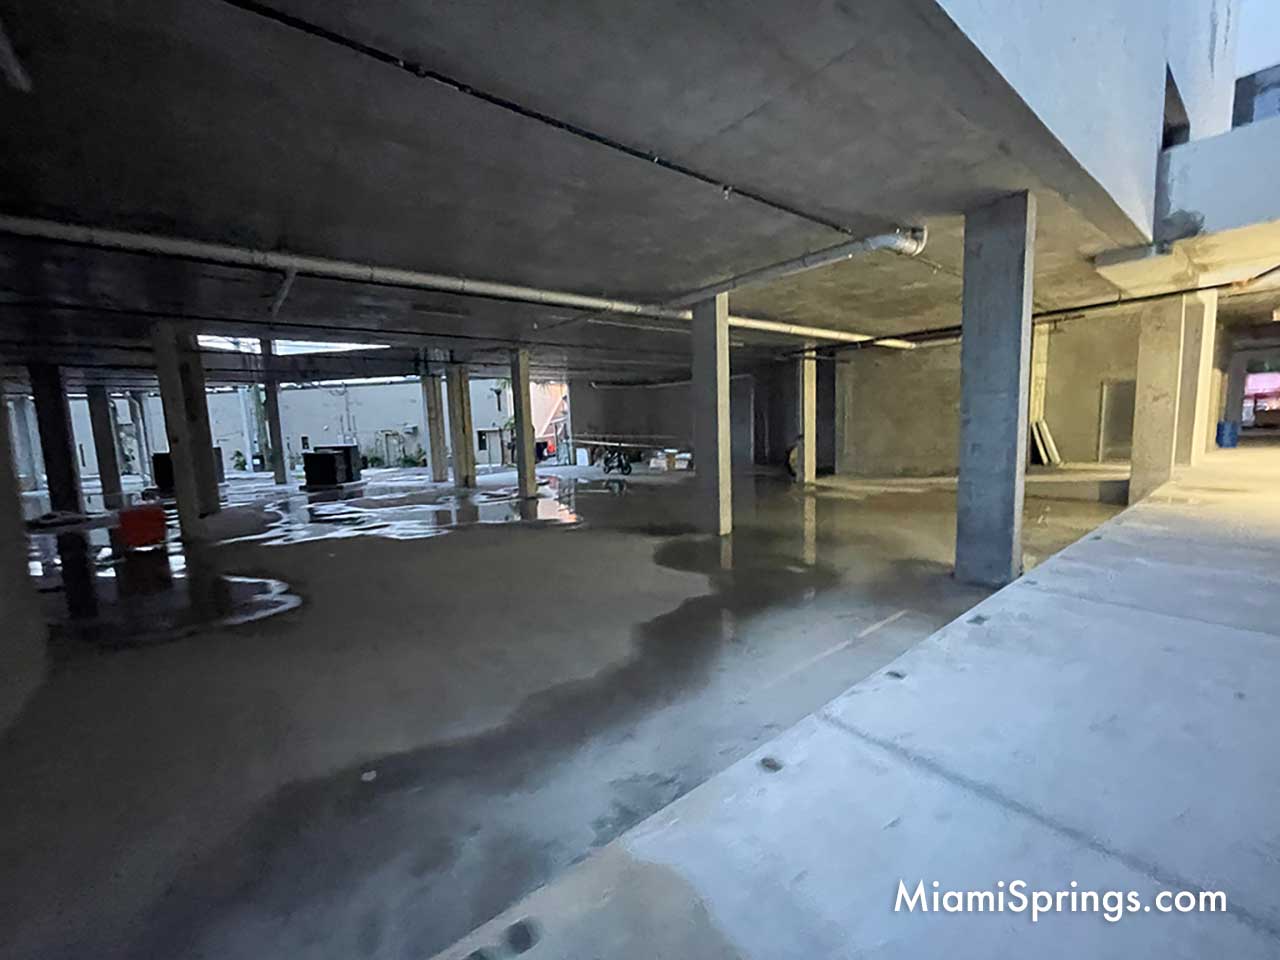 Ground Floor of the Parking Garage at the Miami Springs Town Center located at One Curtiss Parkway in Miami Springs (Photo Credit: MiamiSprings.com)